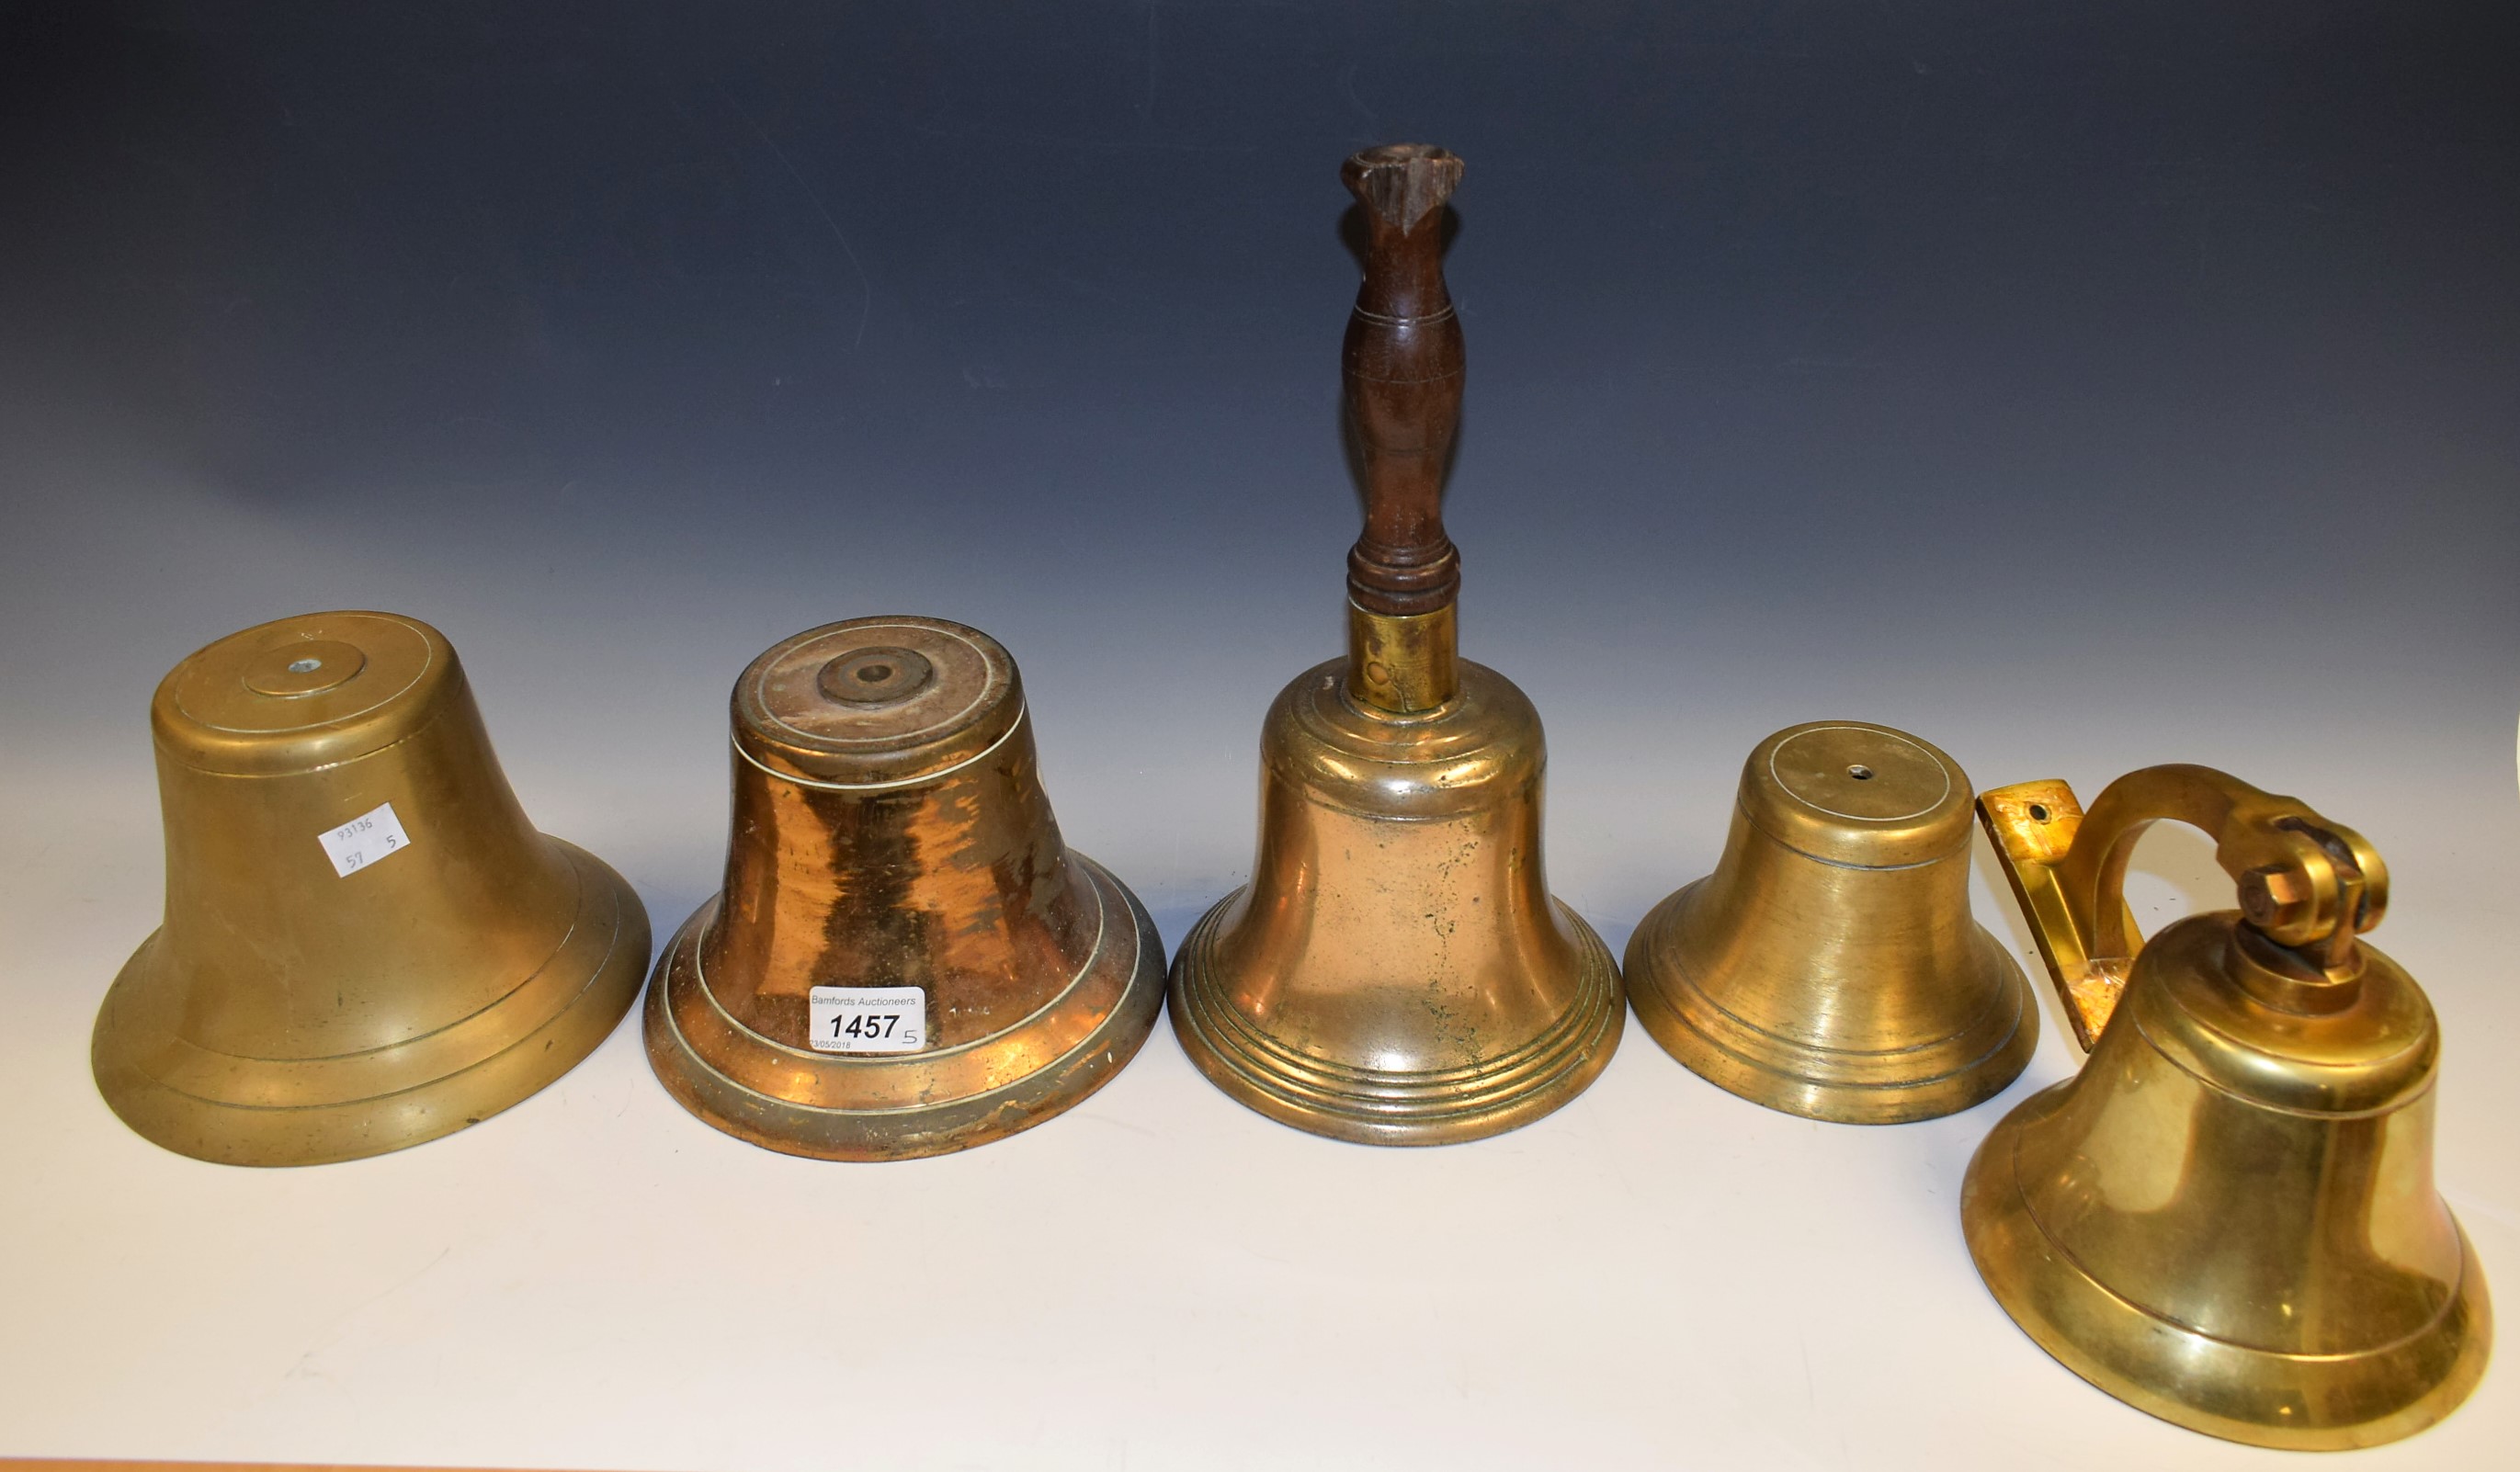 Bells - a late 19th/early 20th century hand bell, bronze bowl, brass clapper, turned wooden handle,